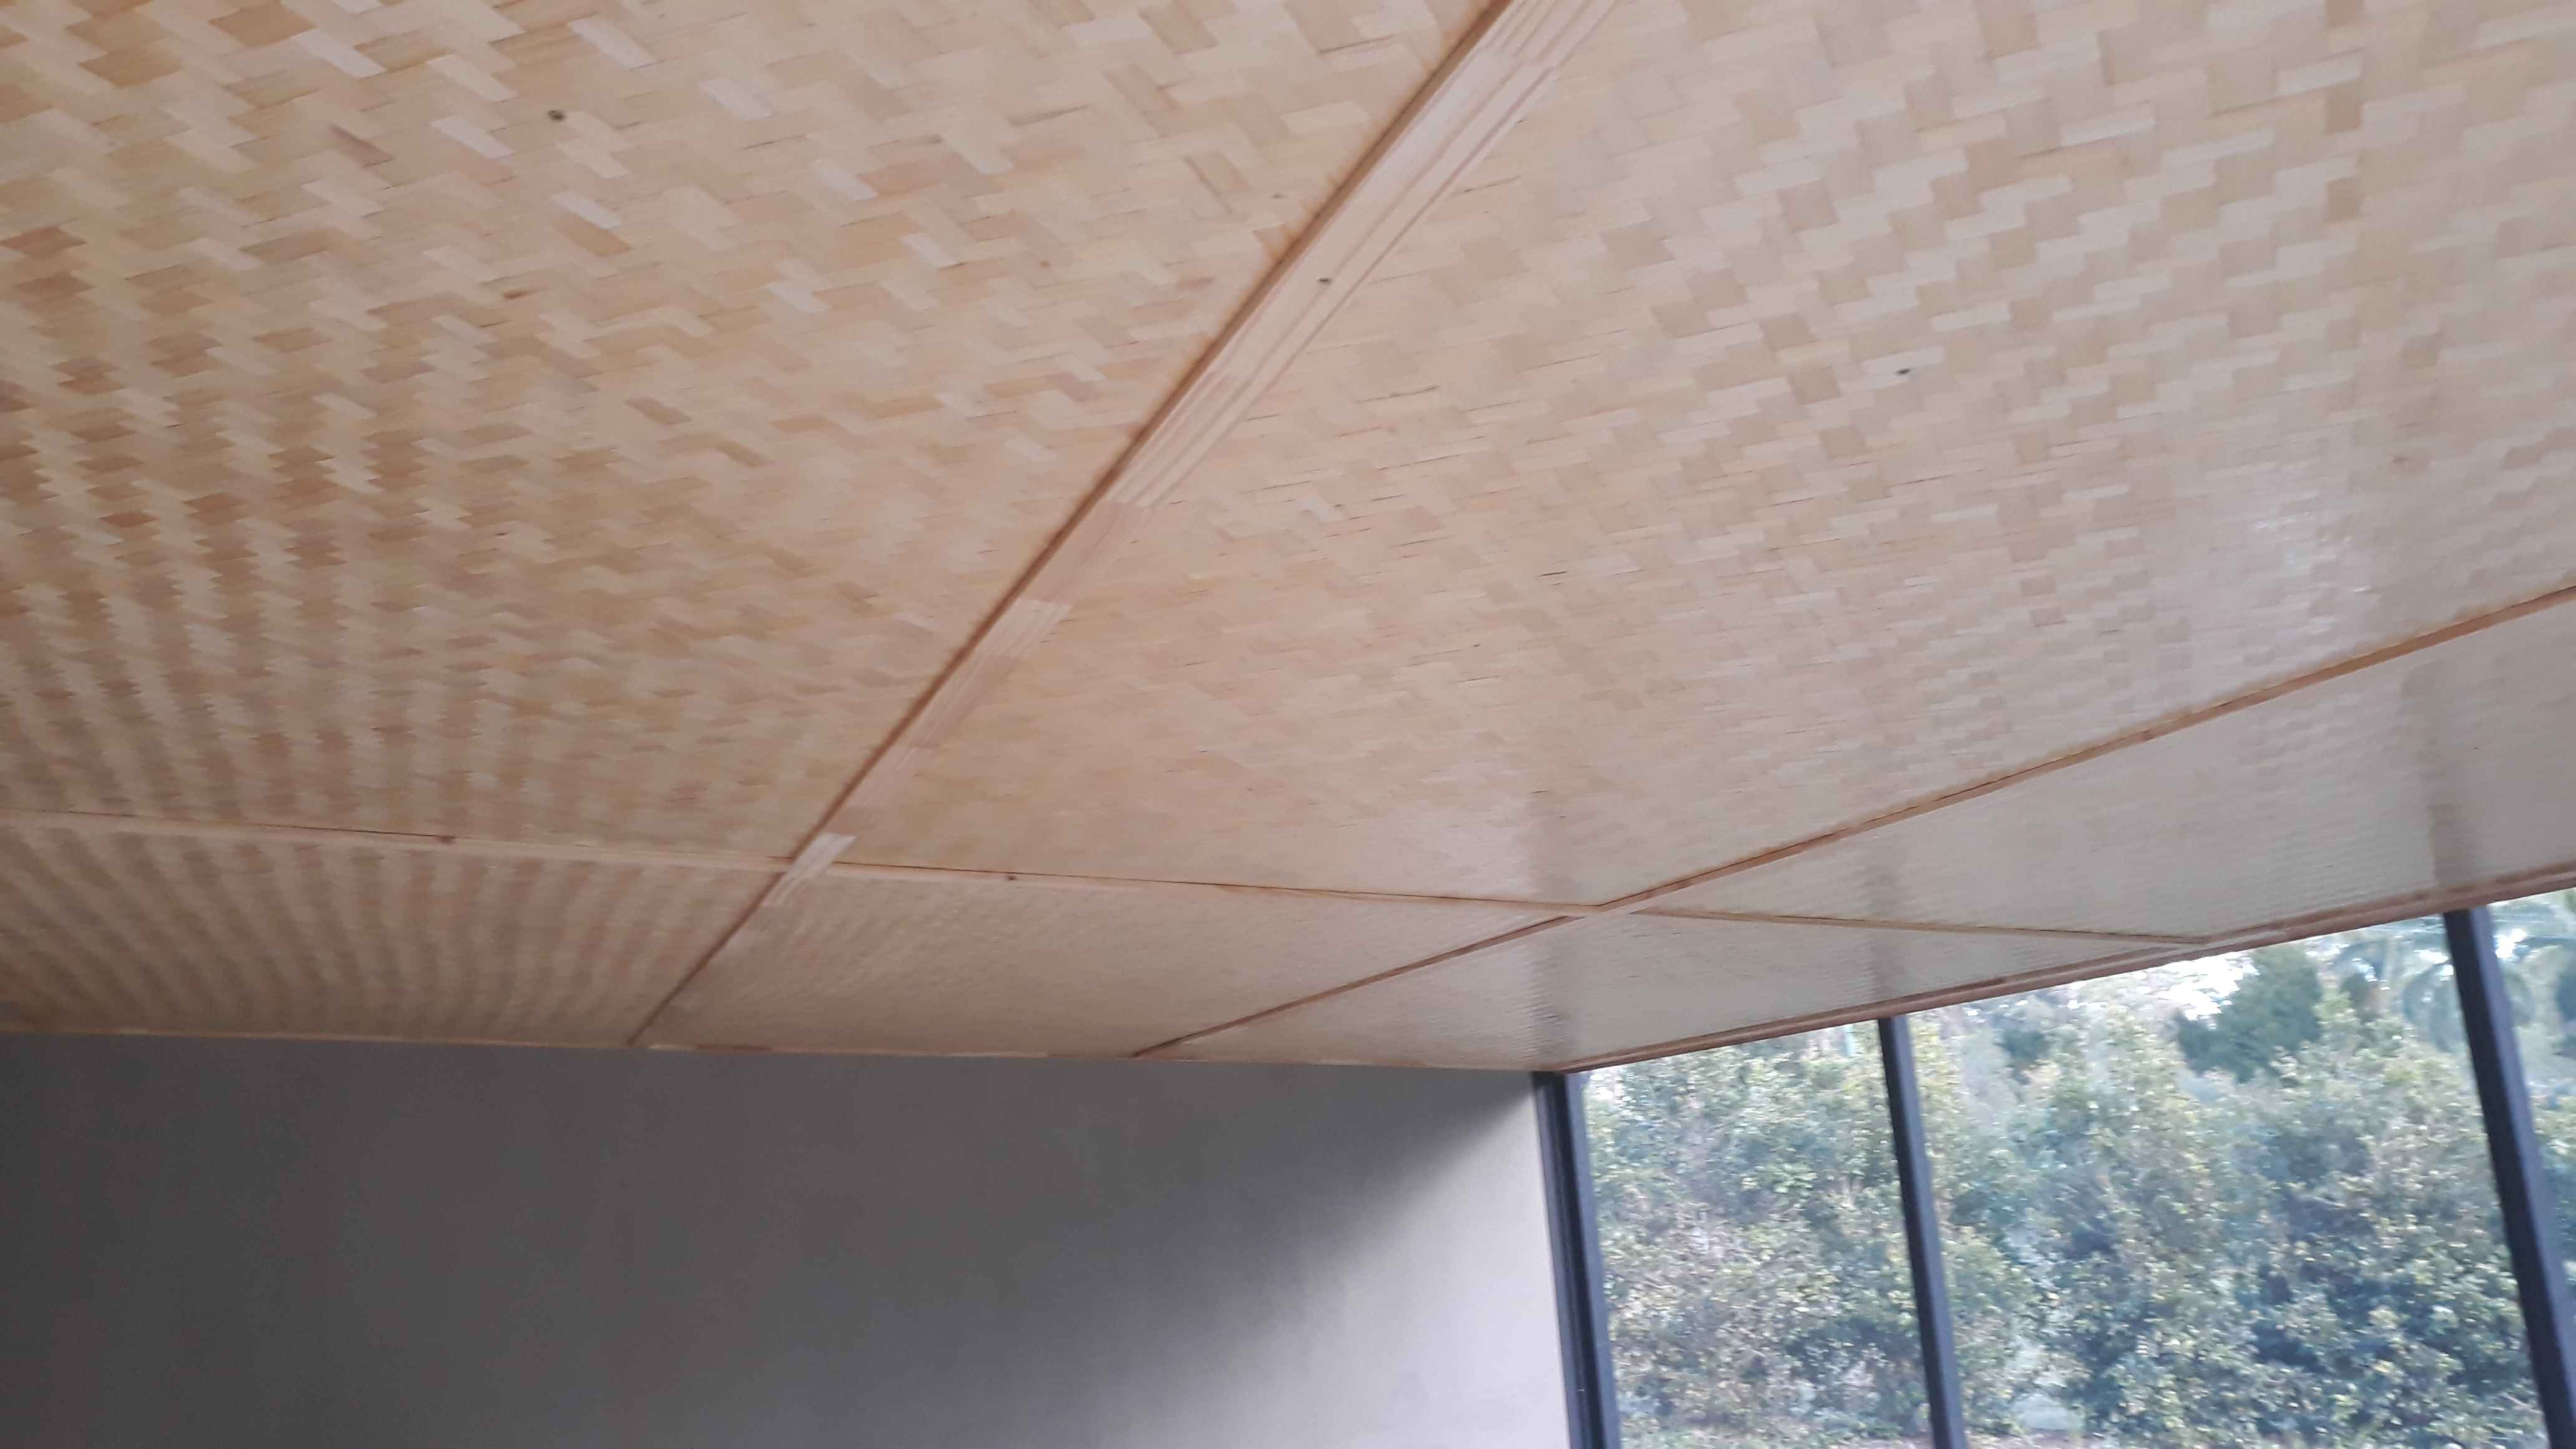 Bamboo ceiling complete